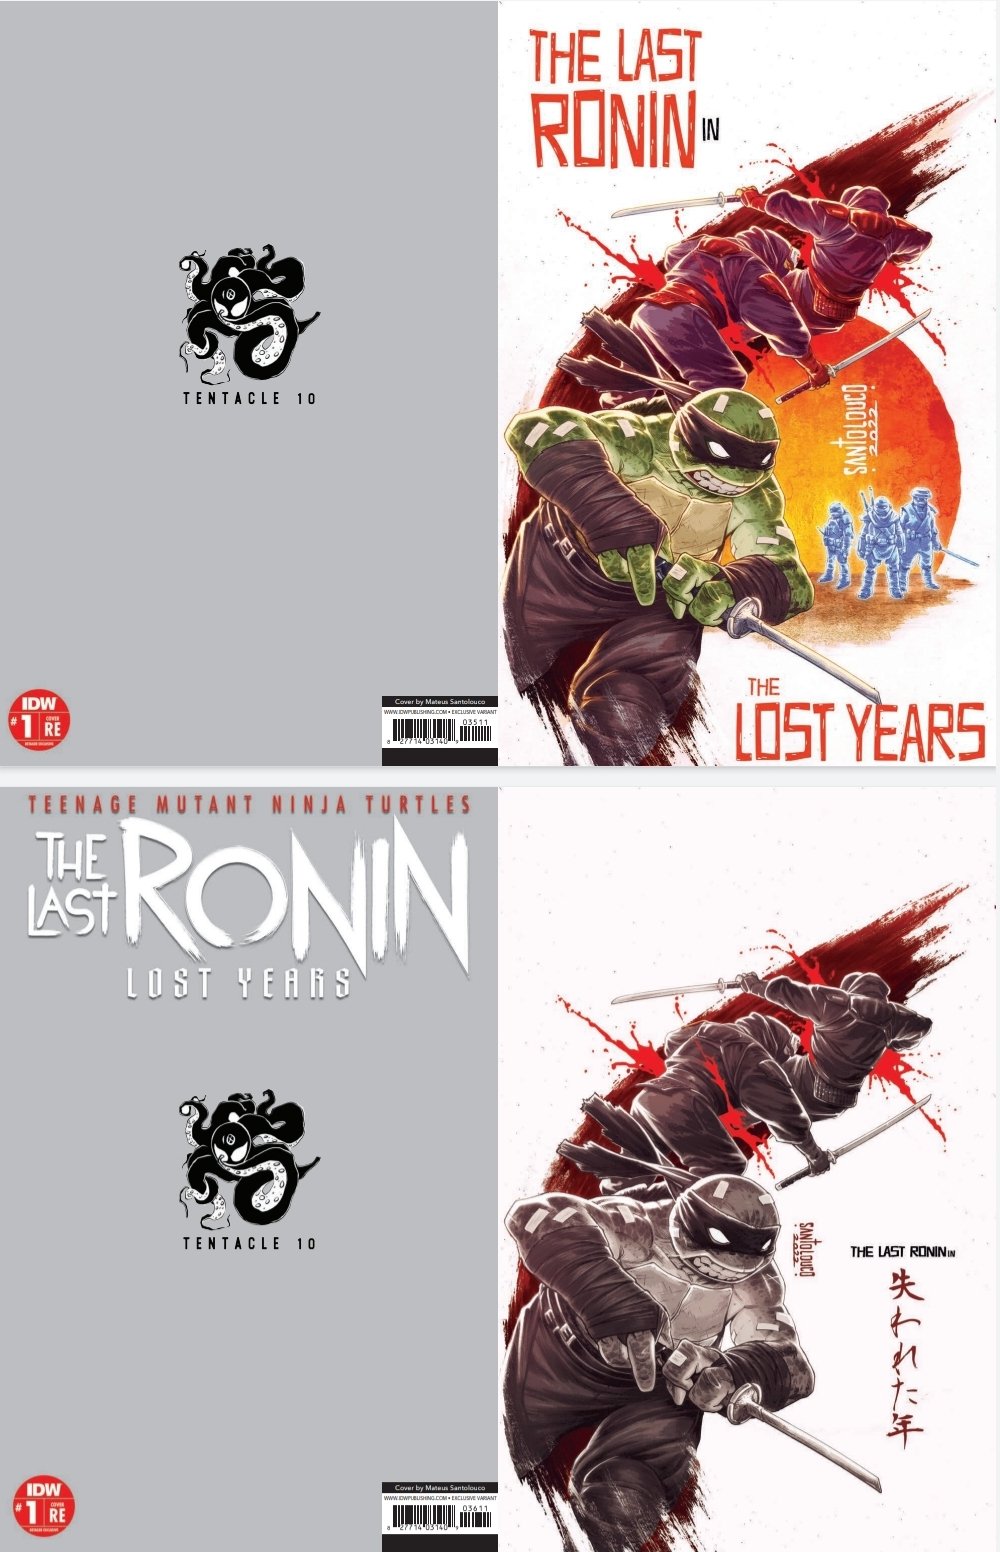 Tentacle10 Variant Set A and B - The Last Ronin: The Lost Years #1  